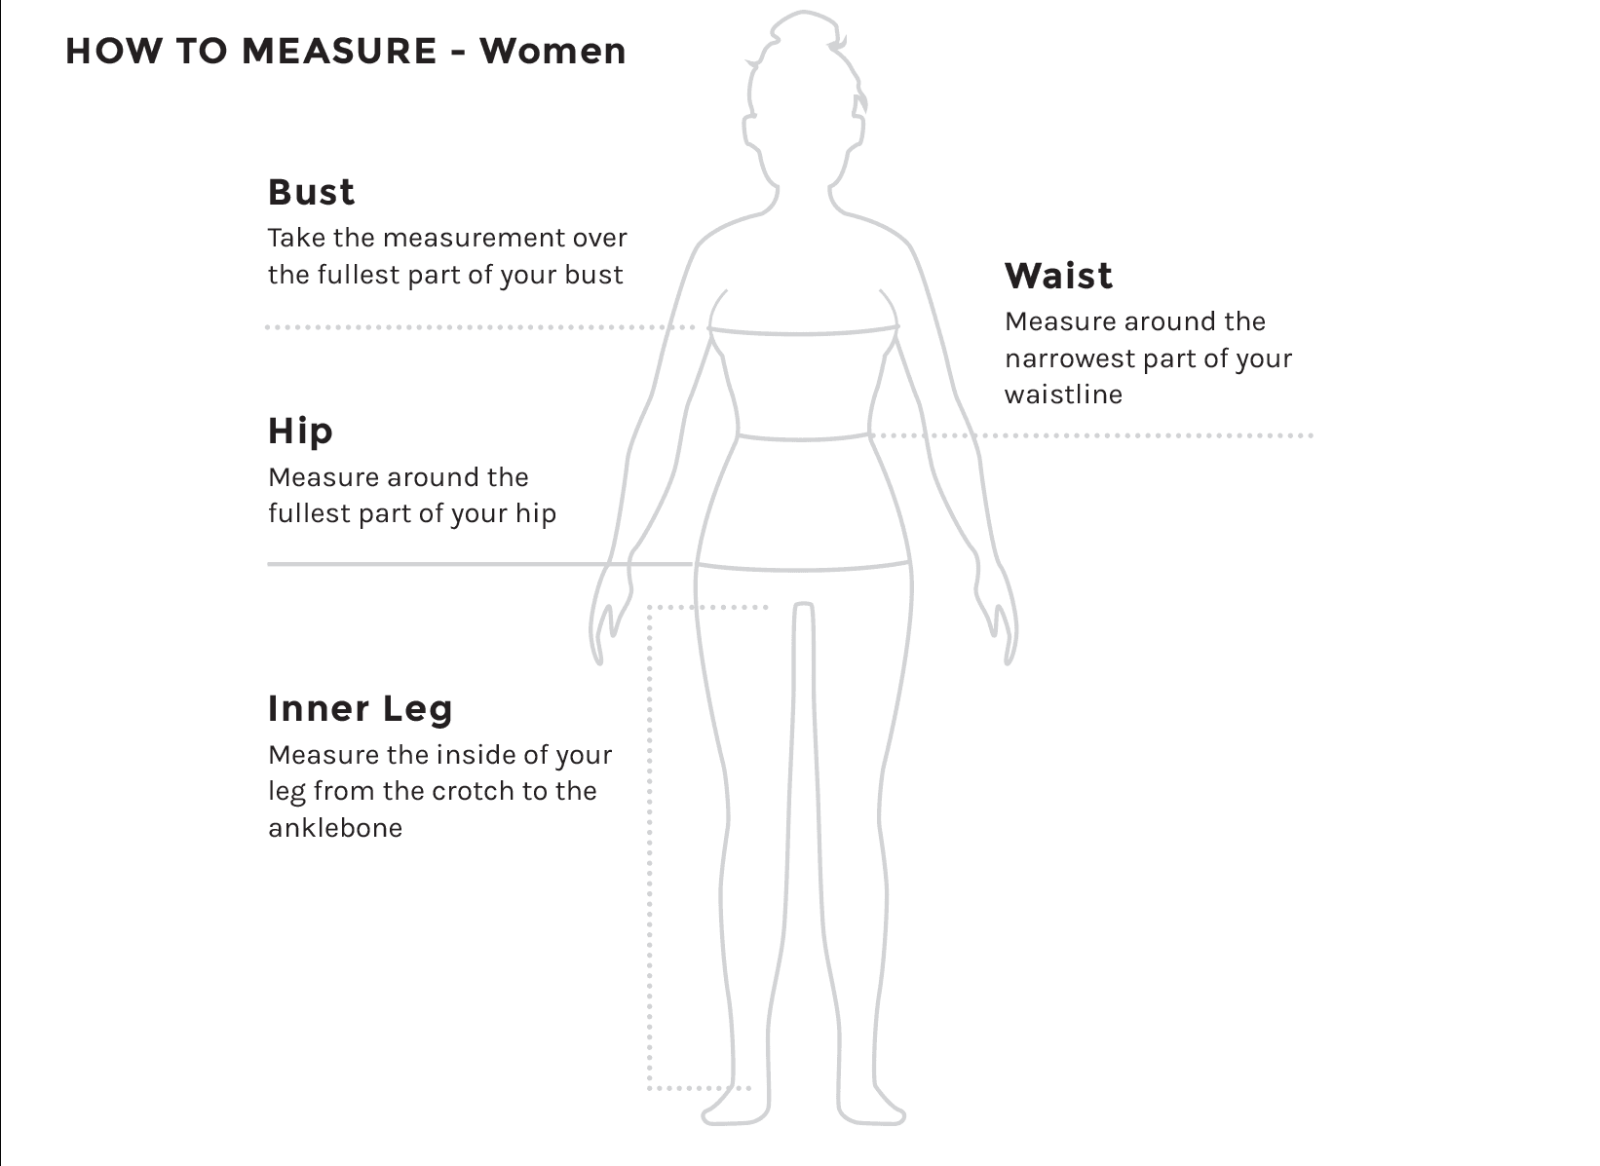 How to Measure - Female Body type